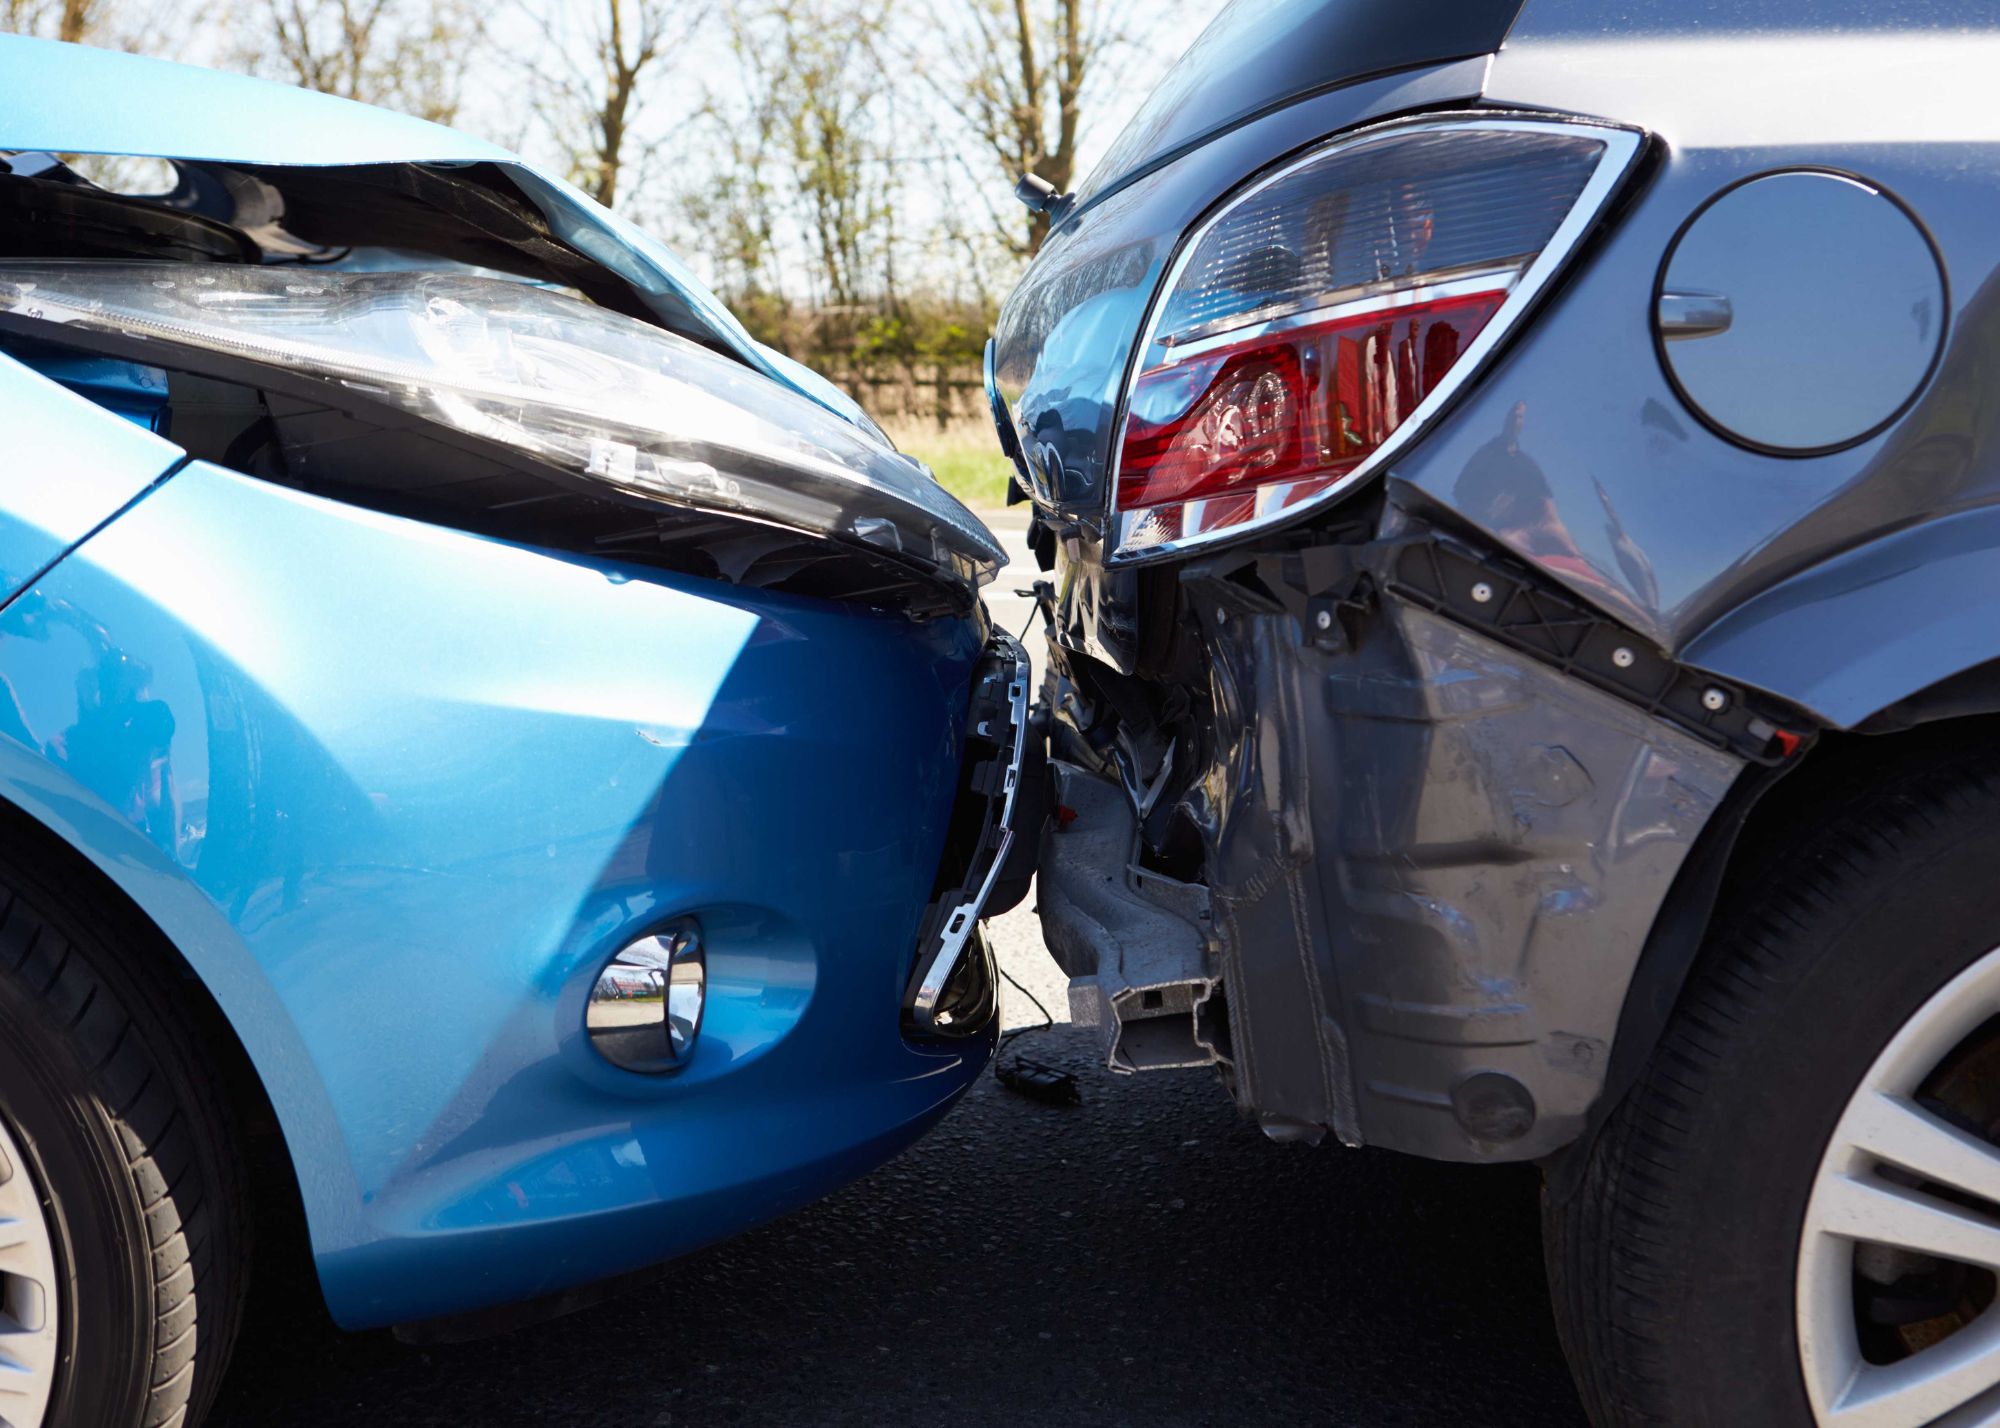 SR22 car accident insurance is required for high-risk drivers involved in an accident. It is commonly used in St. Petersburg, FL to fulfill legal requirements and maintain driving privileges.